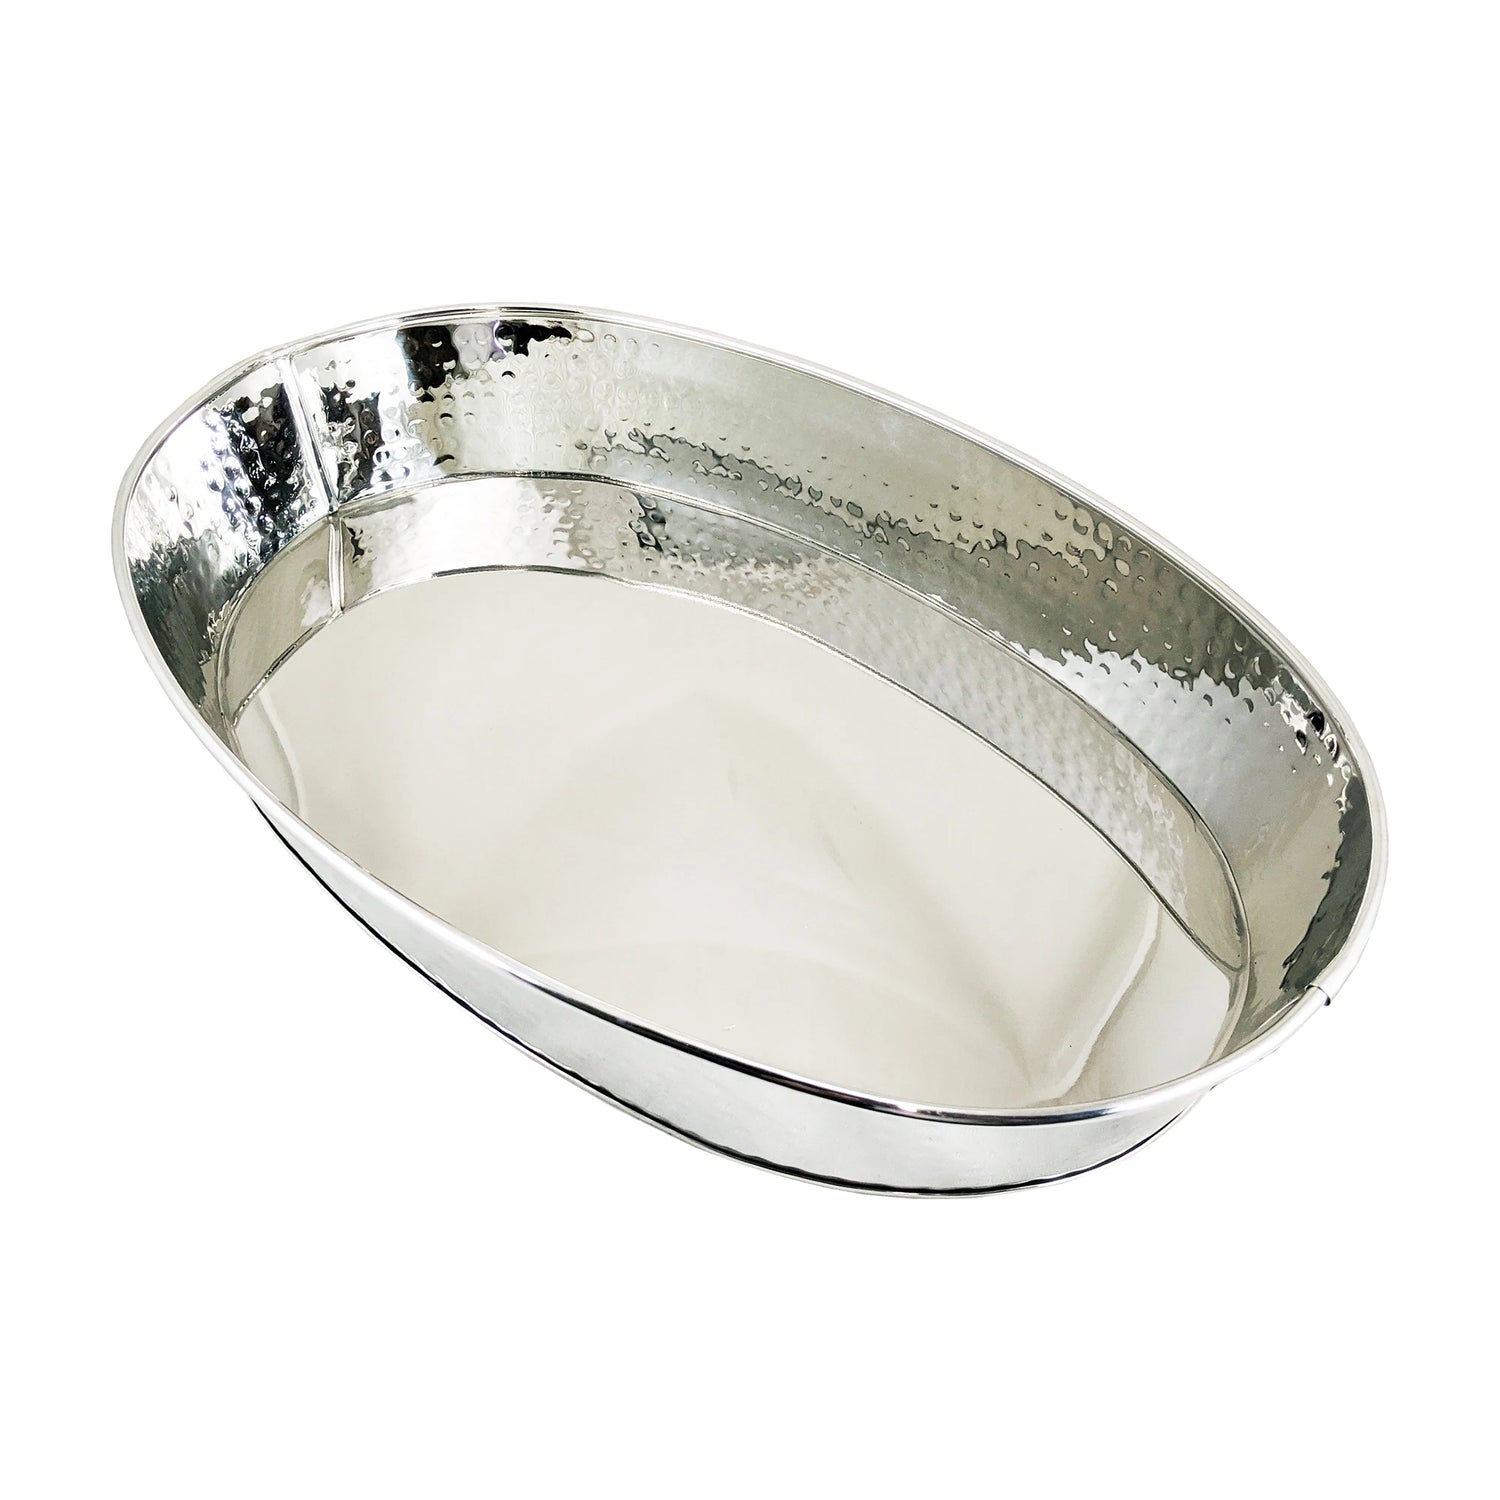 Metal tray with hammering on the sides. Use by itself for barware, drinks, food, or storage. Or use with our Aspen or Colt lines to keep drips and rings from forming on your table